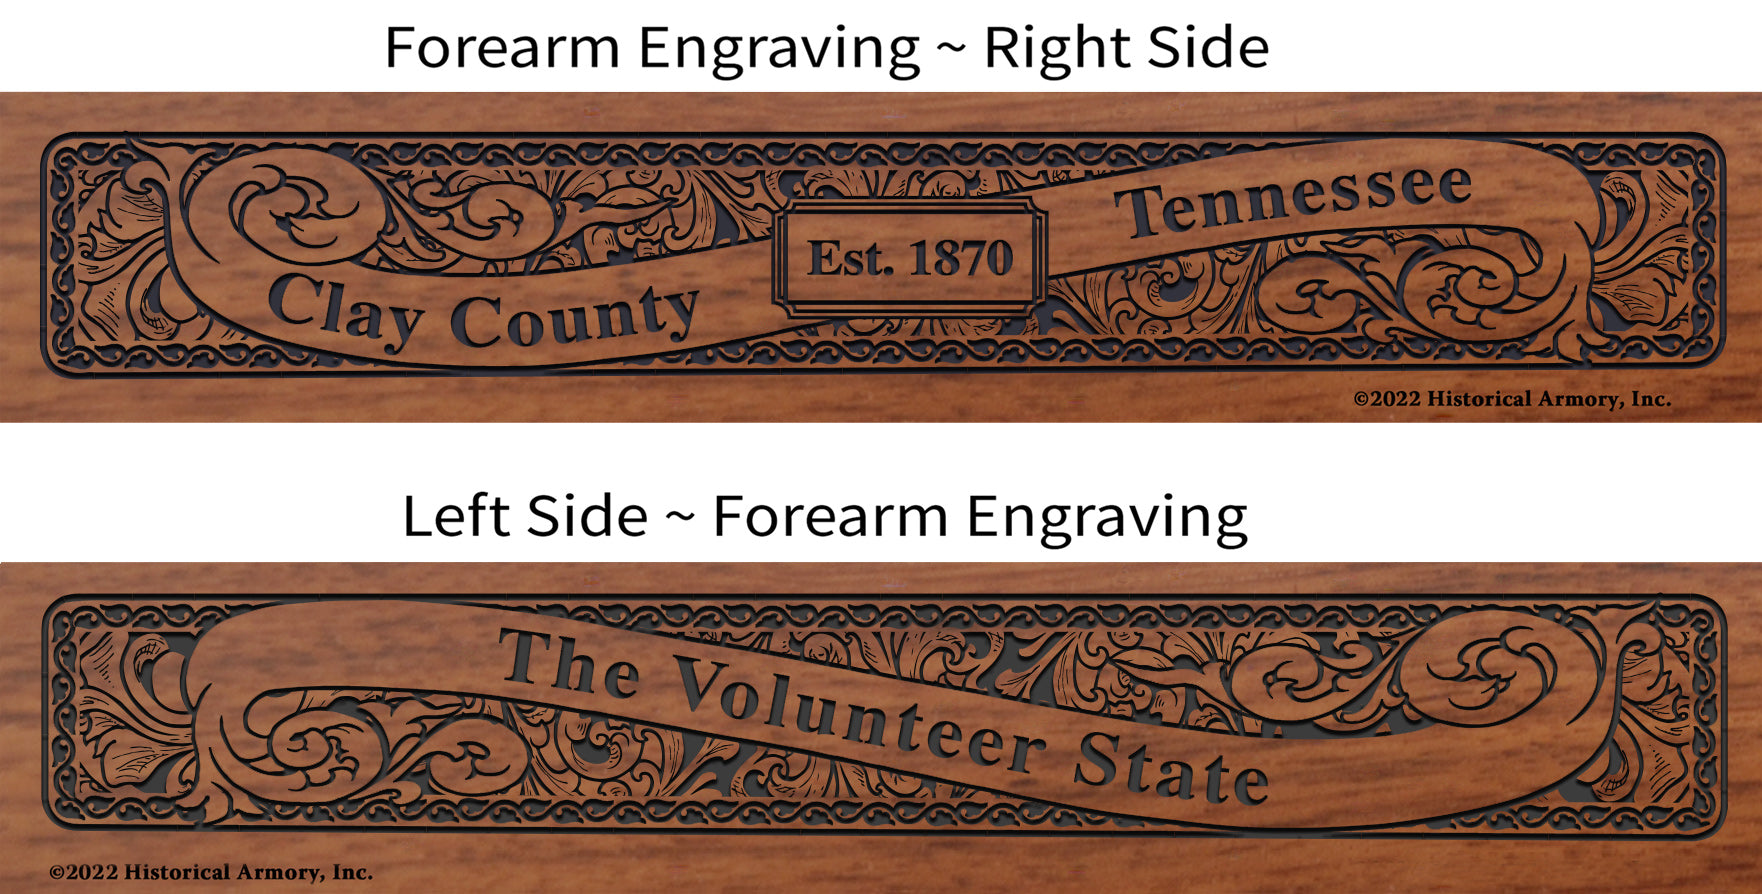 Clay County Tennessee Engraved Rifle Forearm